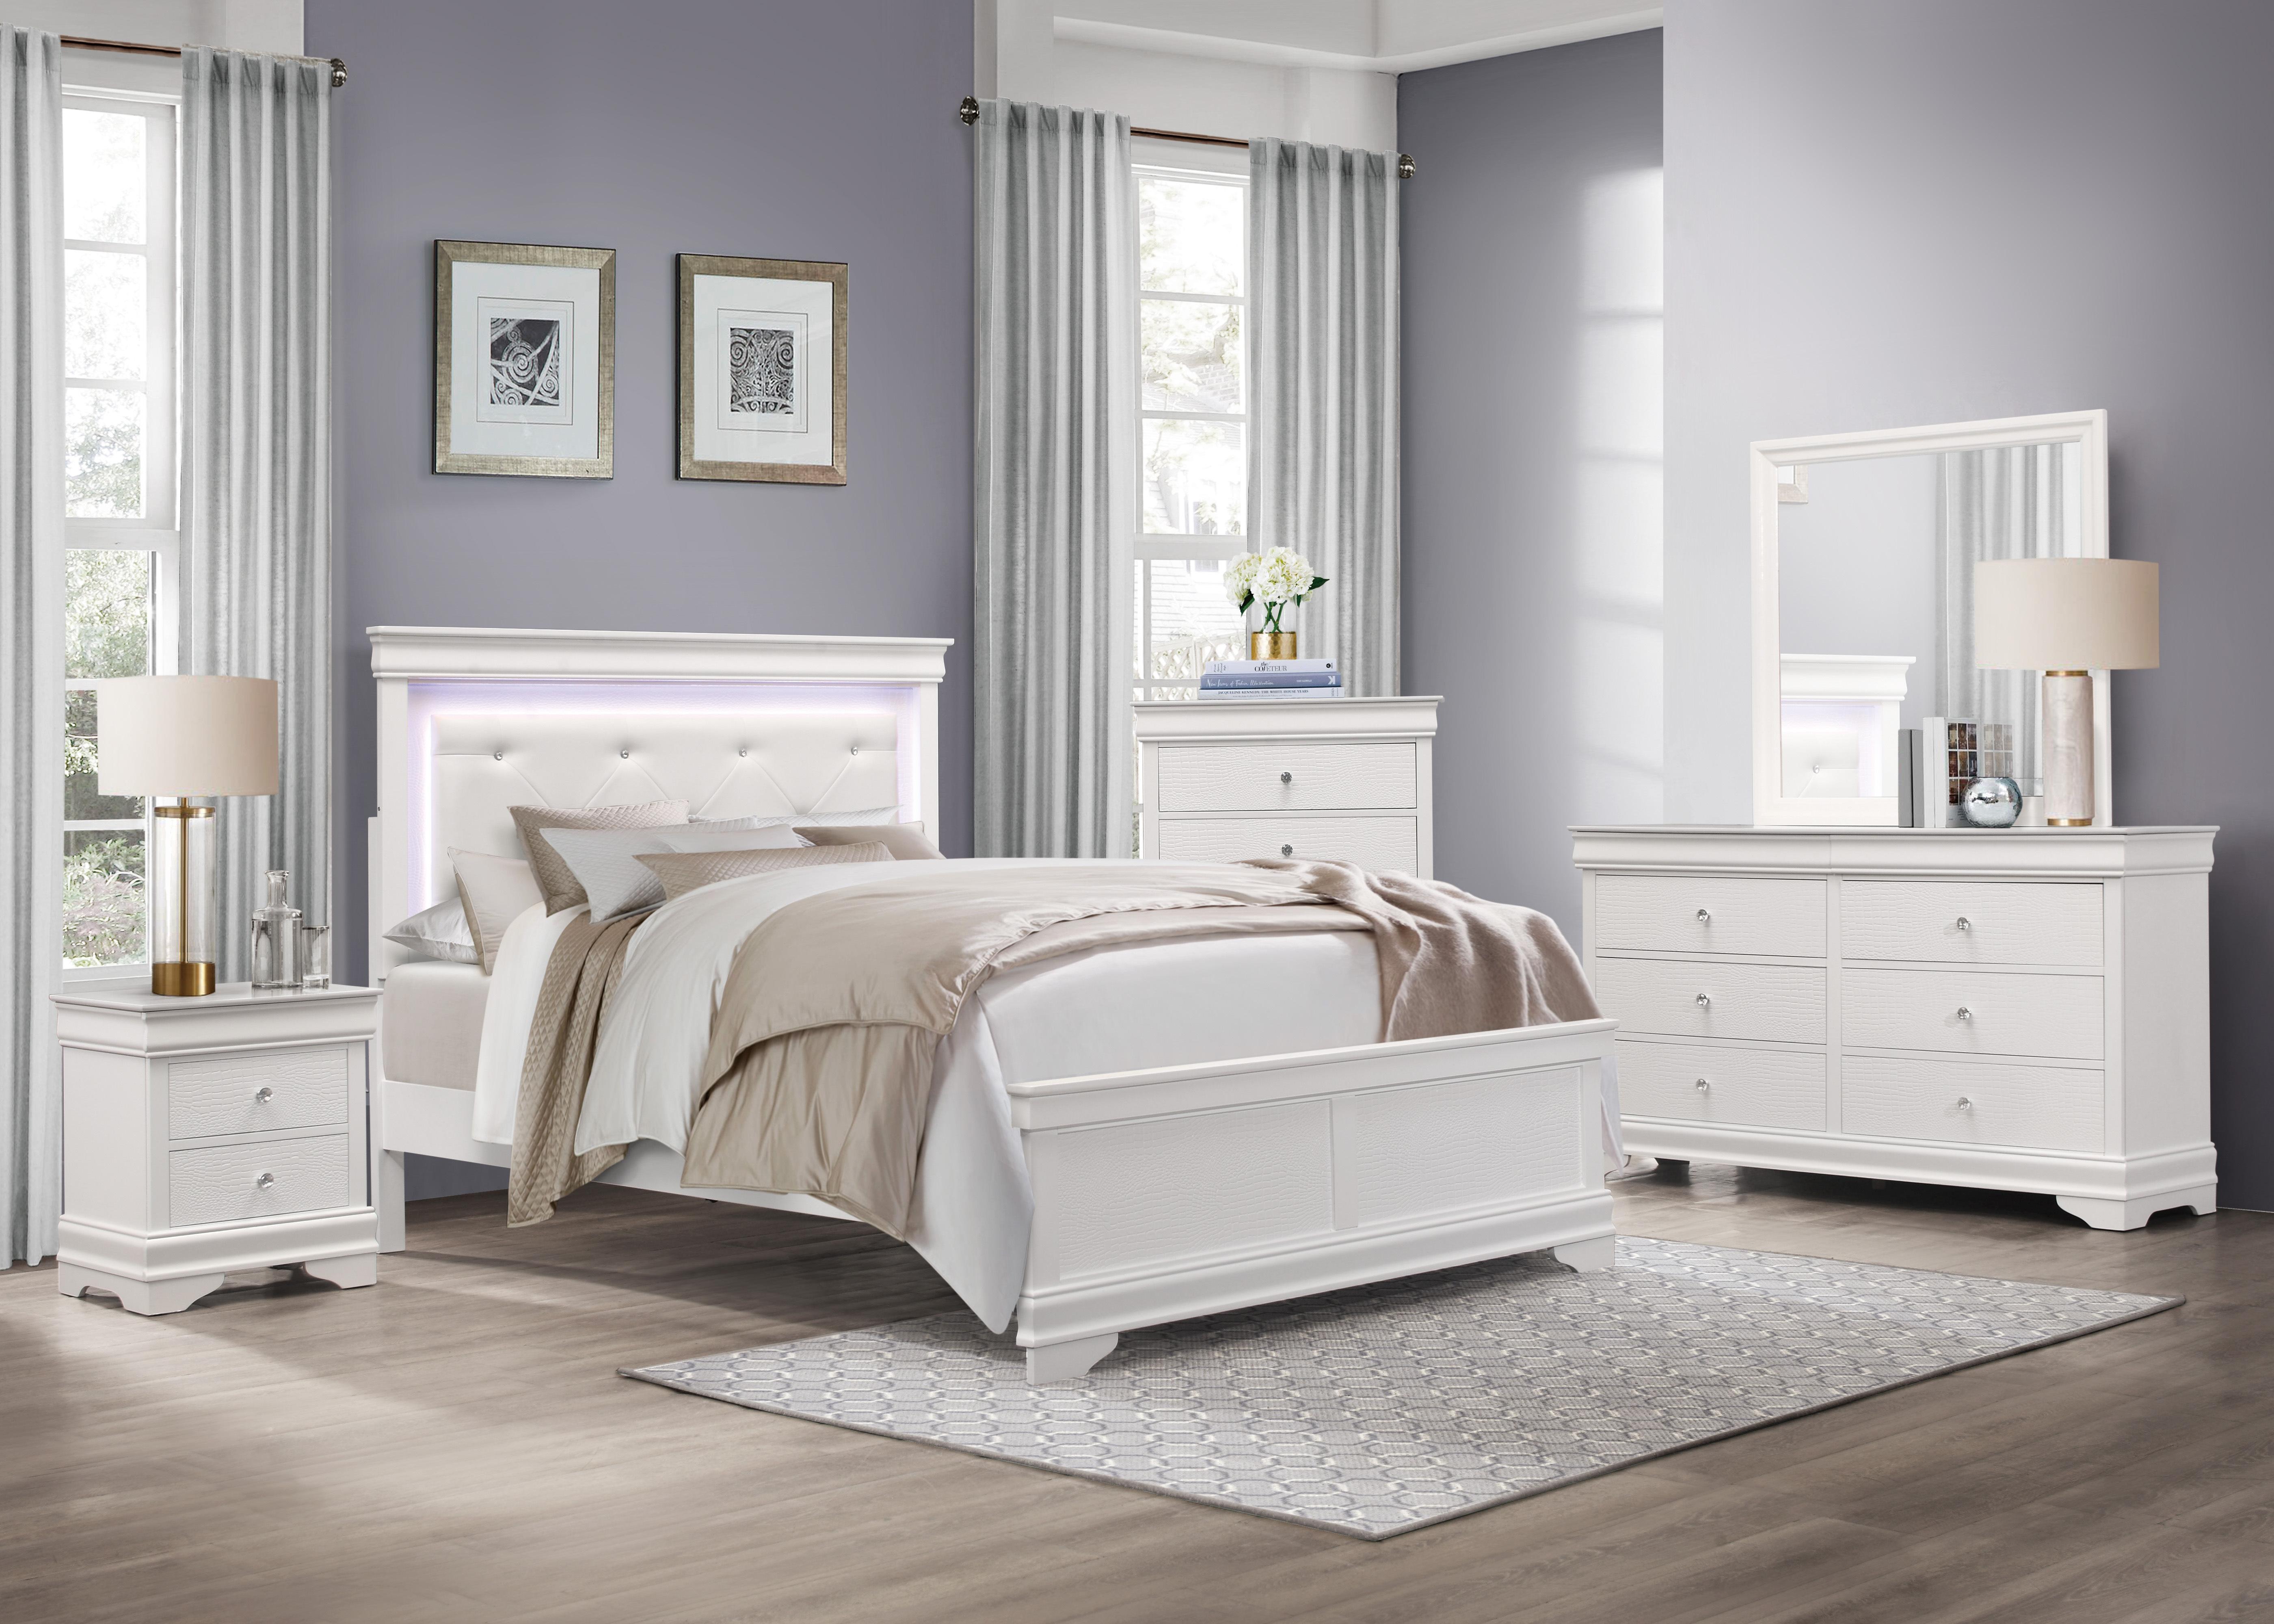 Traditional Bedroom Set 1556WF-1-6PC Lana 1556WF-1-6PC in White Faux Leather